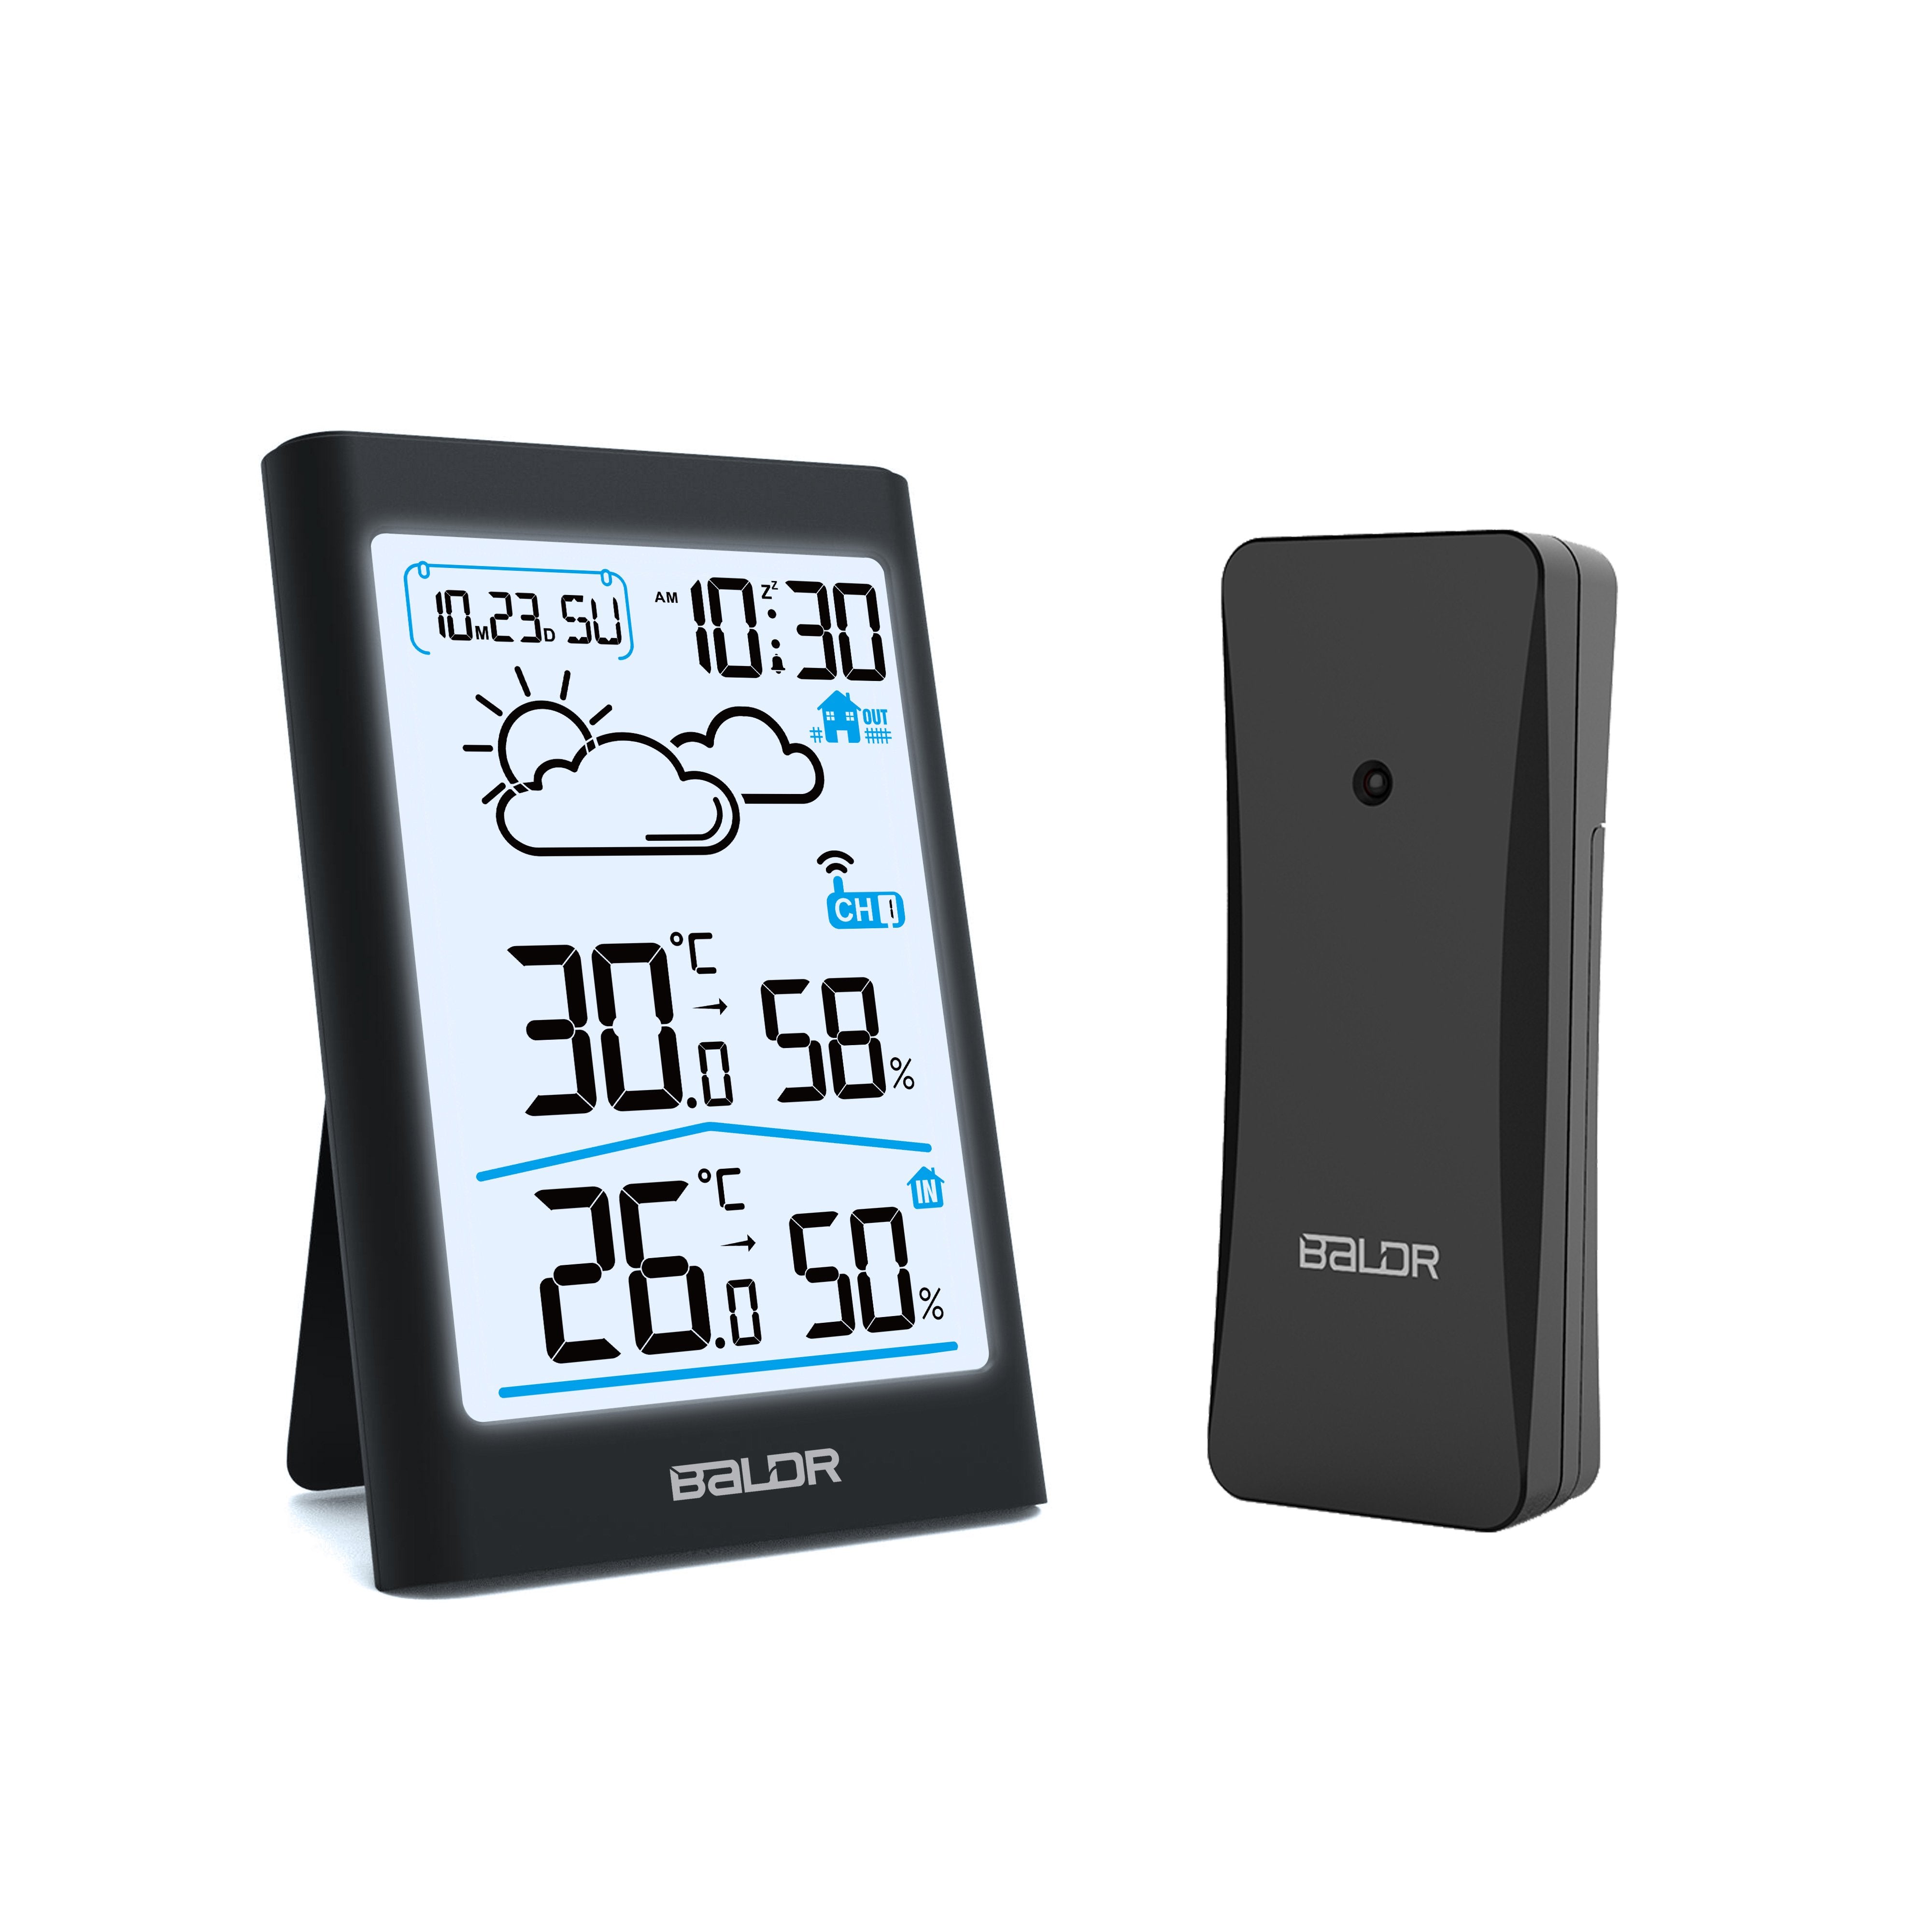 Round Digital Thermometer, Indoor&Outdoor - BALDR Electronic